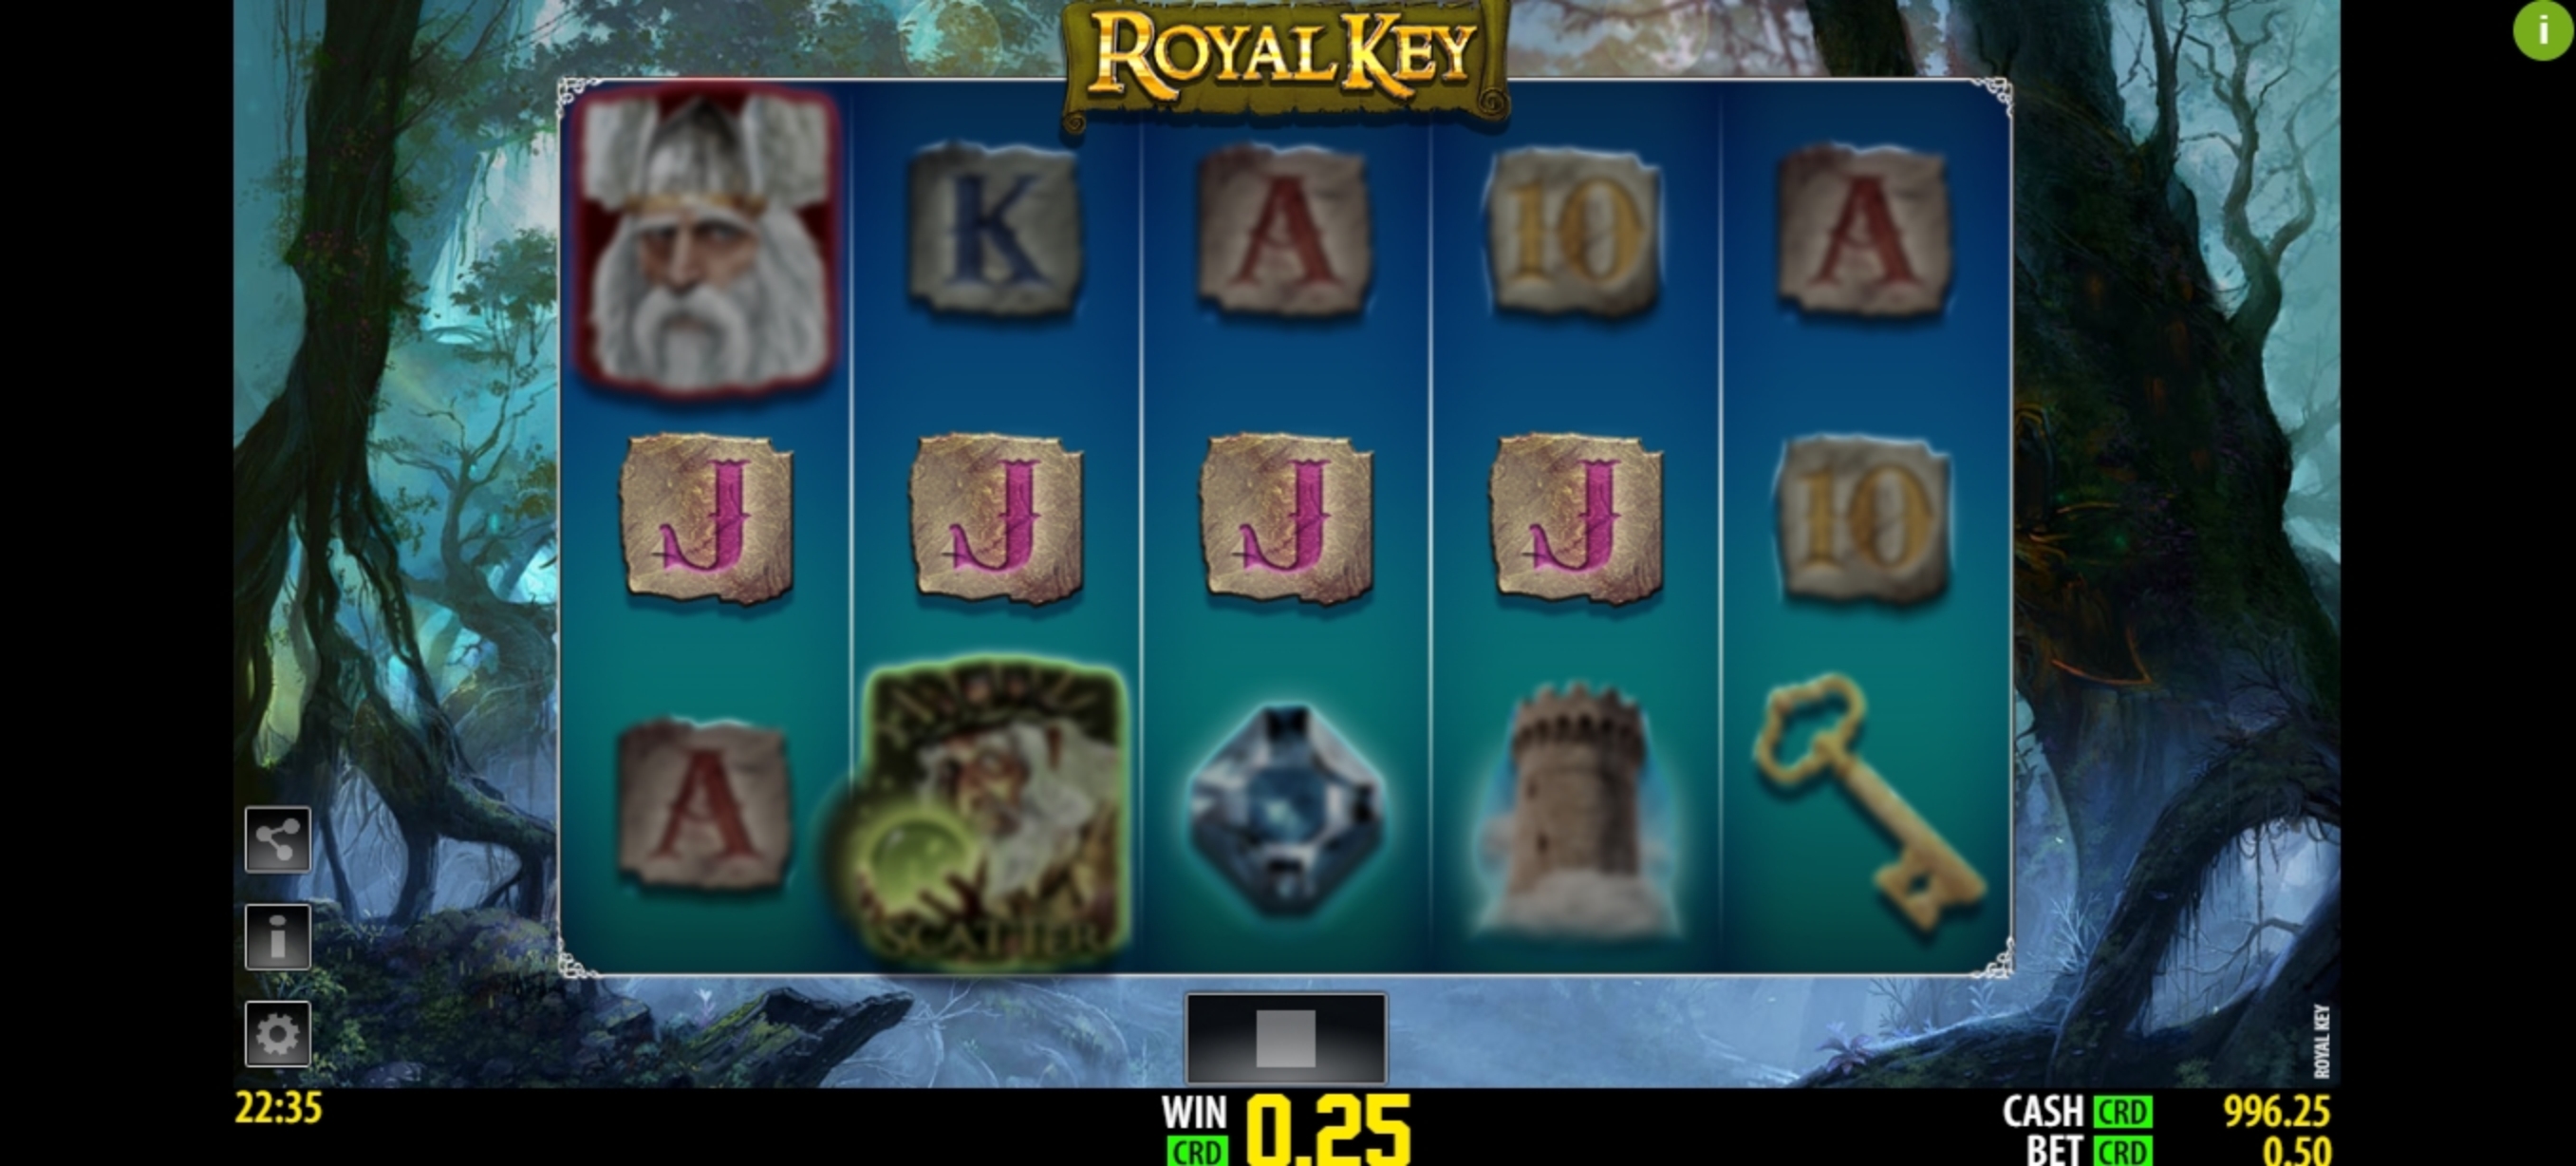 Win Money in Royal Key Free Slot Game by World Match